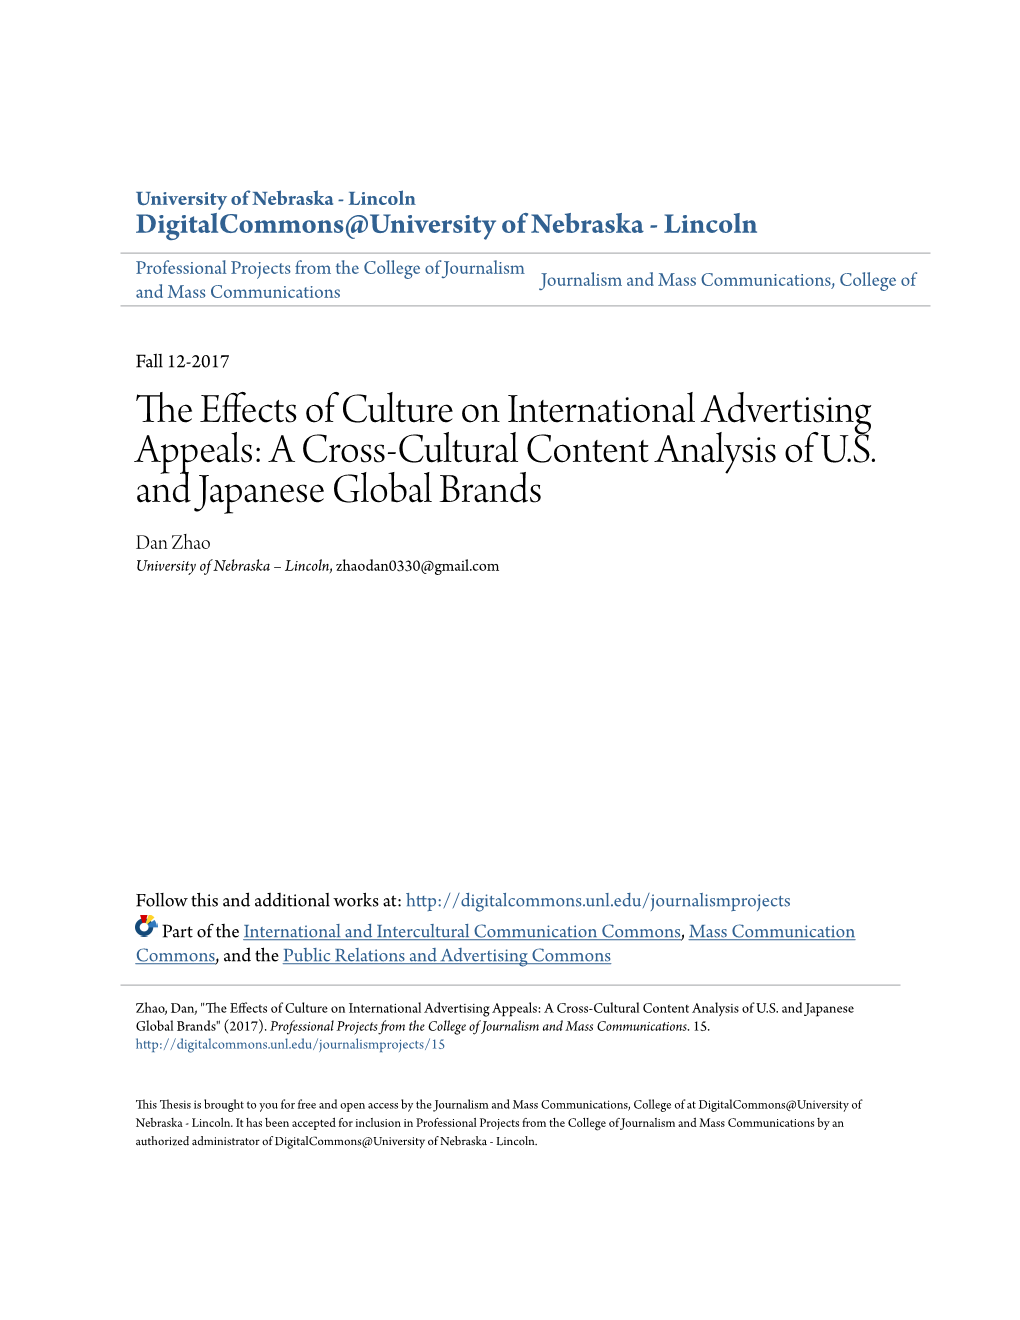 The Effects of Culture on International Advertising Appeals: a Cross-Cultural Content Analysis of U.S